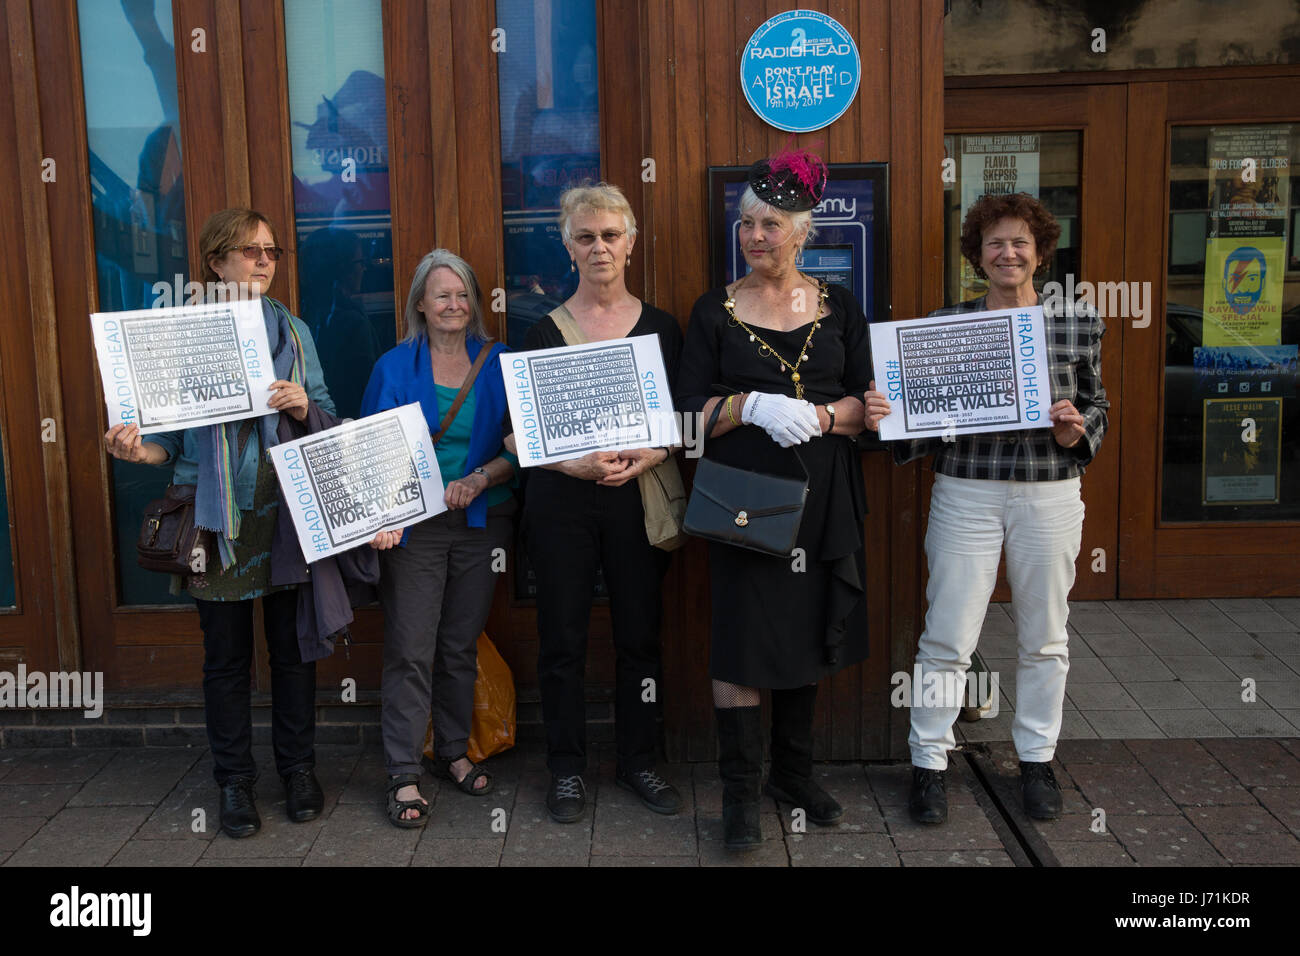 Oxford, UK. 22nd May, 2017. Activists unveil a fake blue plaque outside the O2 Academy Oxford, where Radiohead filmed the video for 'Creep', as part of a protest calling upon the band to cancel a concert in Tel Aviv on 19th July 2017 in support of the cultural boycott called by Palestinian organisations as part of the BDS (Boycott, Divestment and Sanctions) campaign. There are many historical links between Radiohead and the city of Oxford. Credit: Mark Kerrison/Alamy Live News Stock Photo